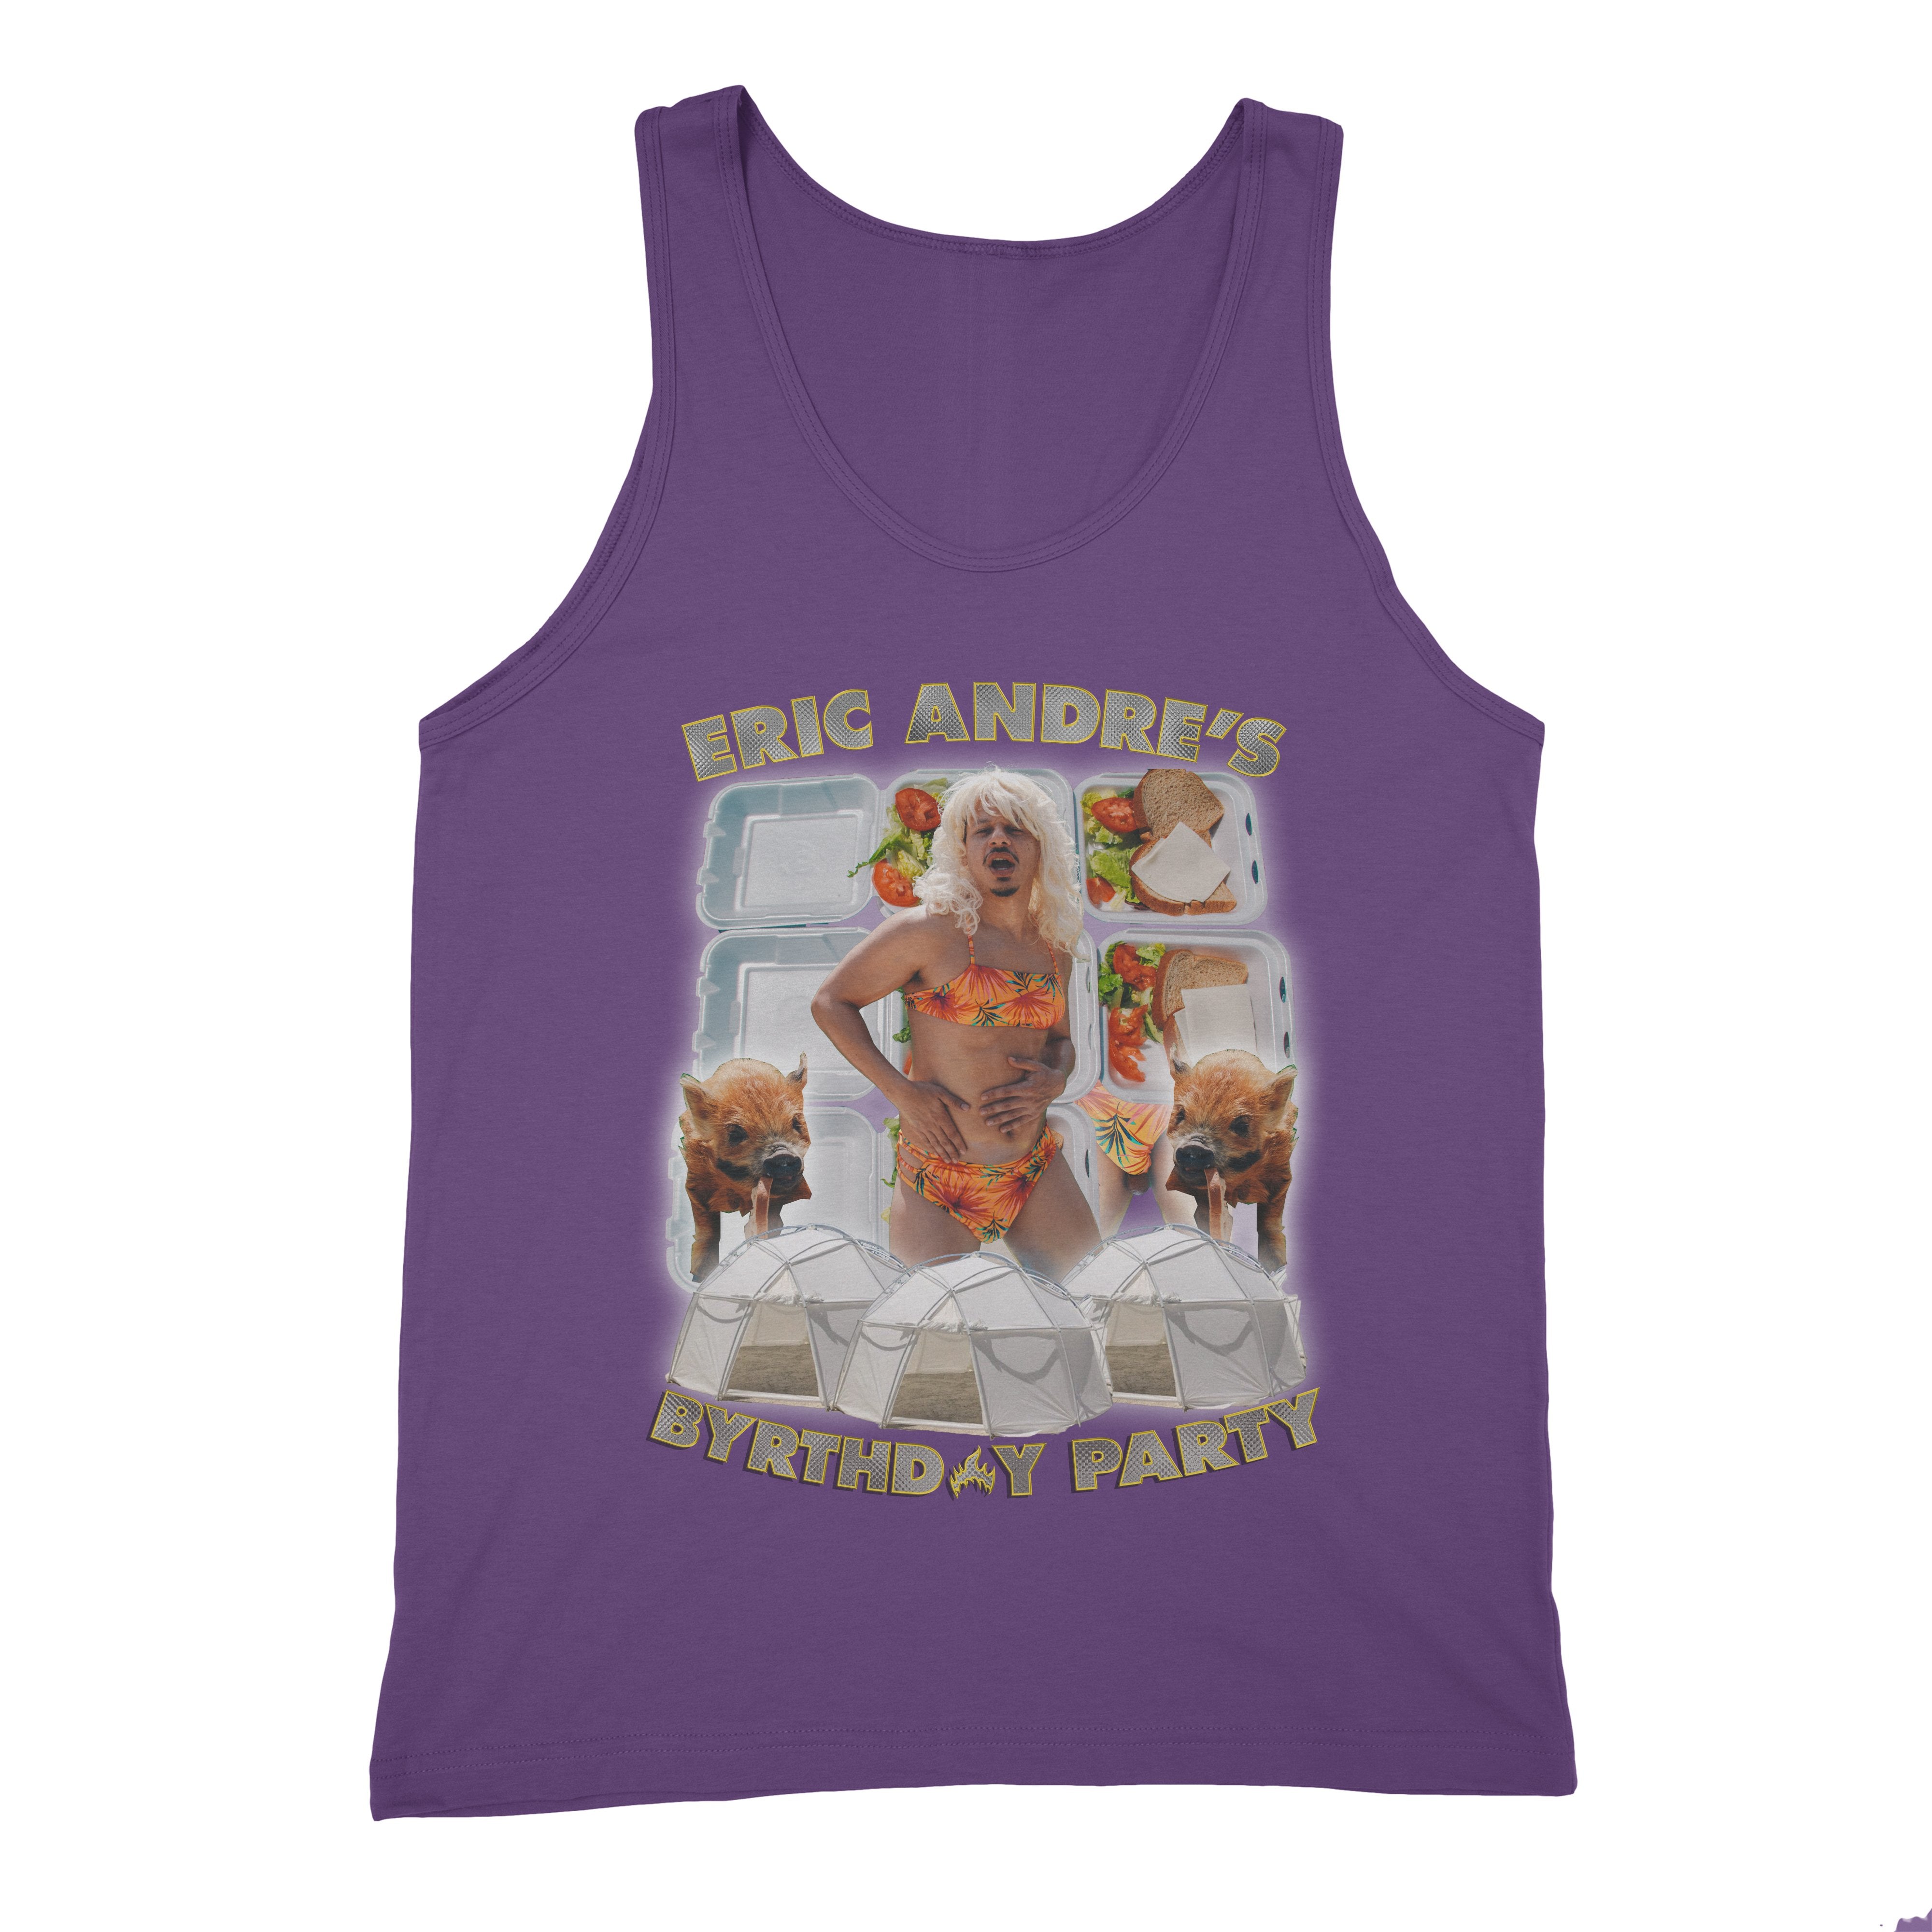 purple unisex tank with Eric Andre birthday party design.